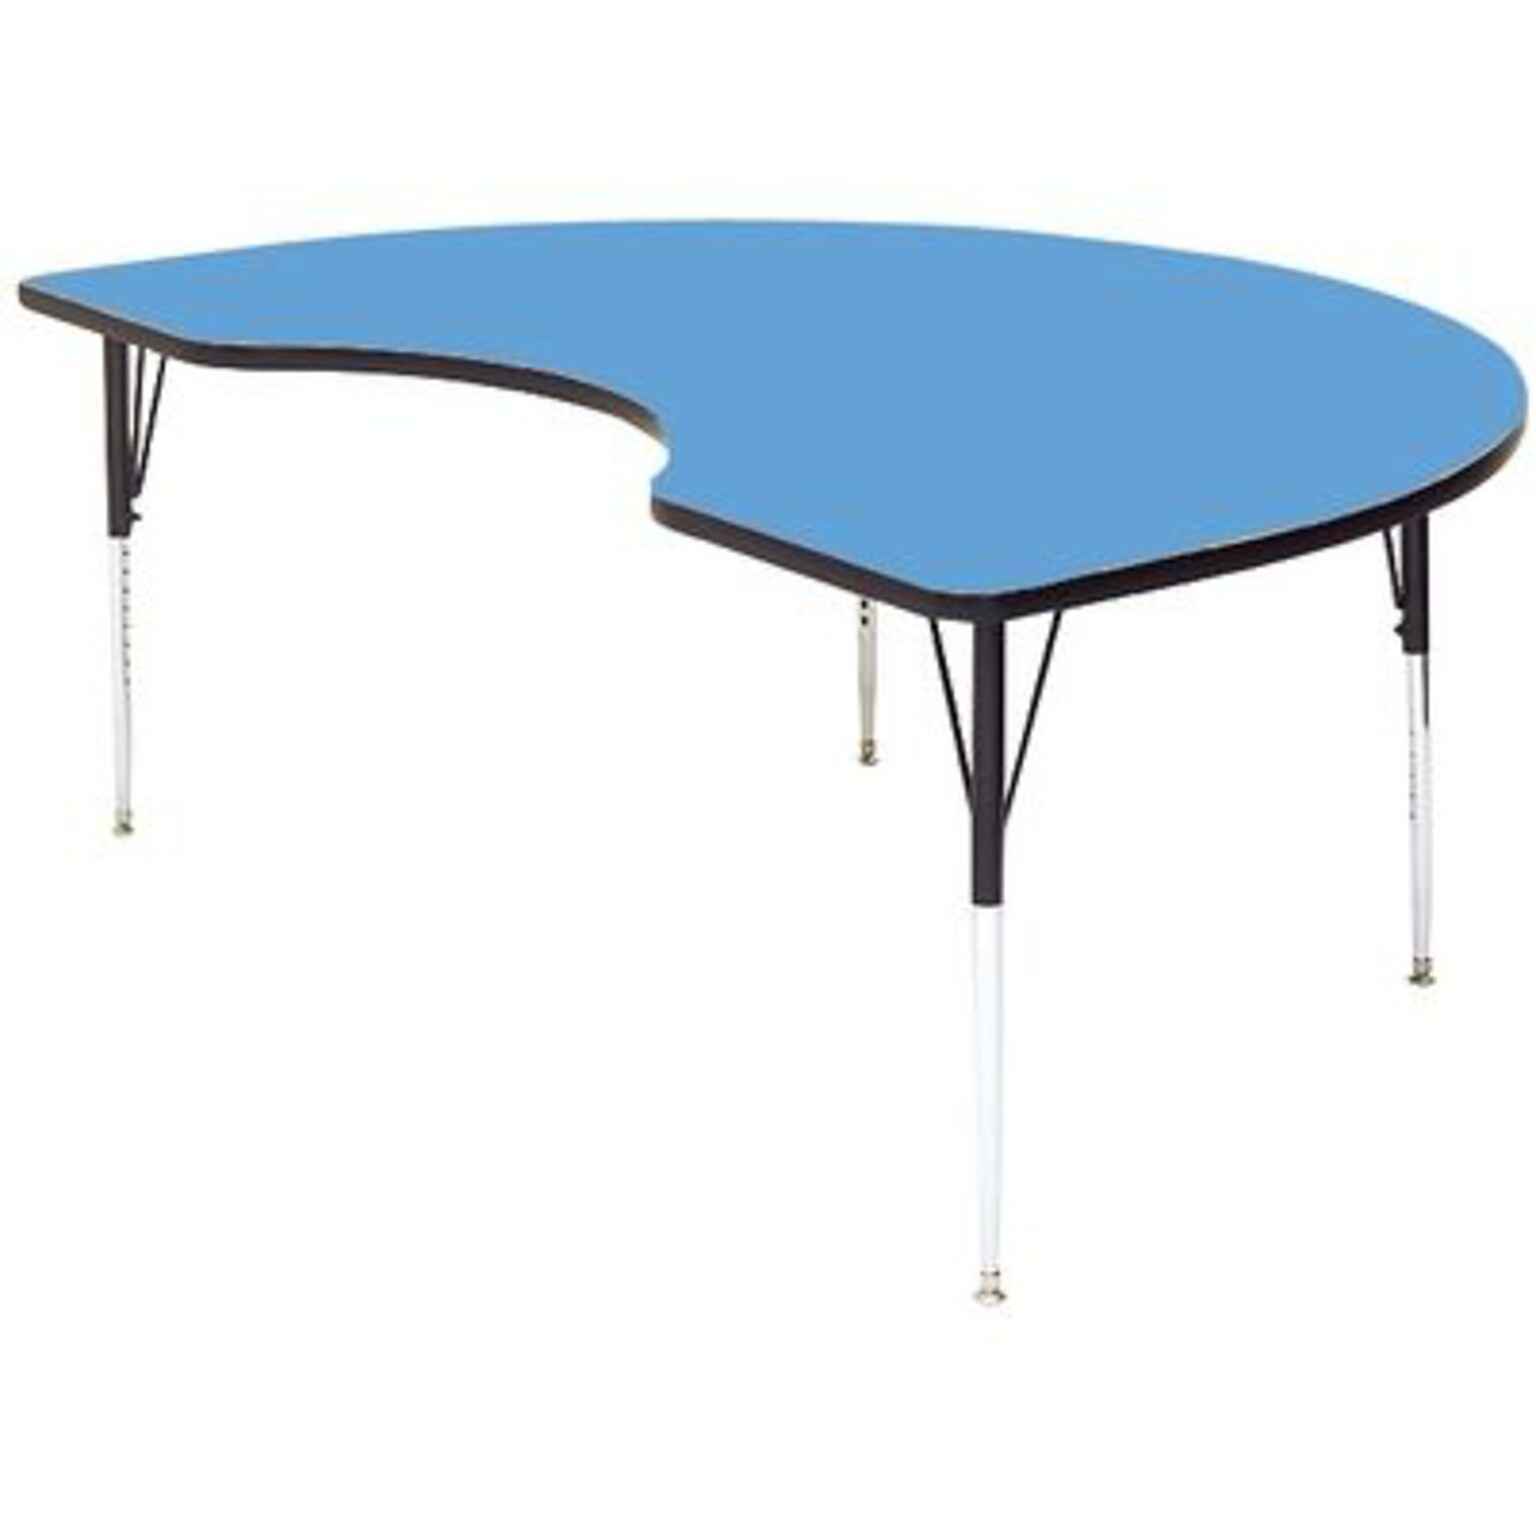 Correll® 48D x 72L Kidney Shaped Heavy Duty Activity Table; Blue High Pressure Laminate Top